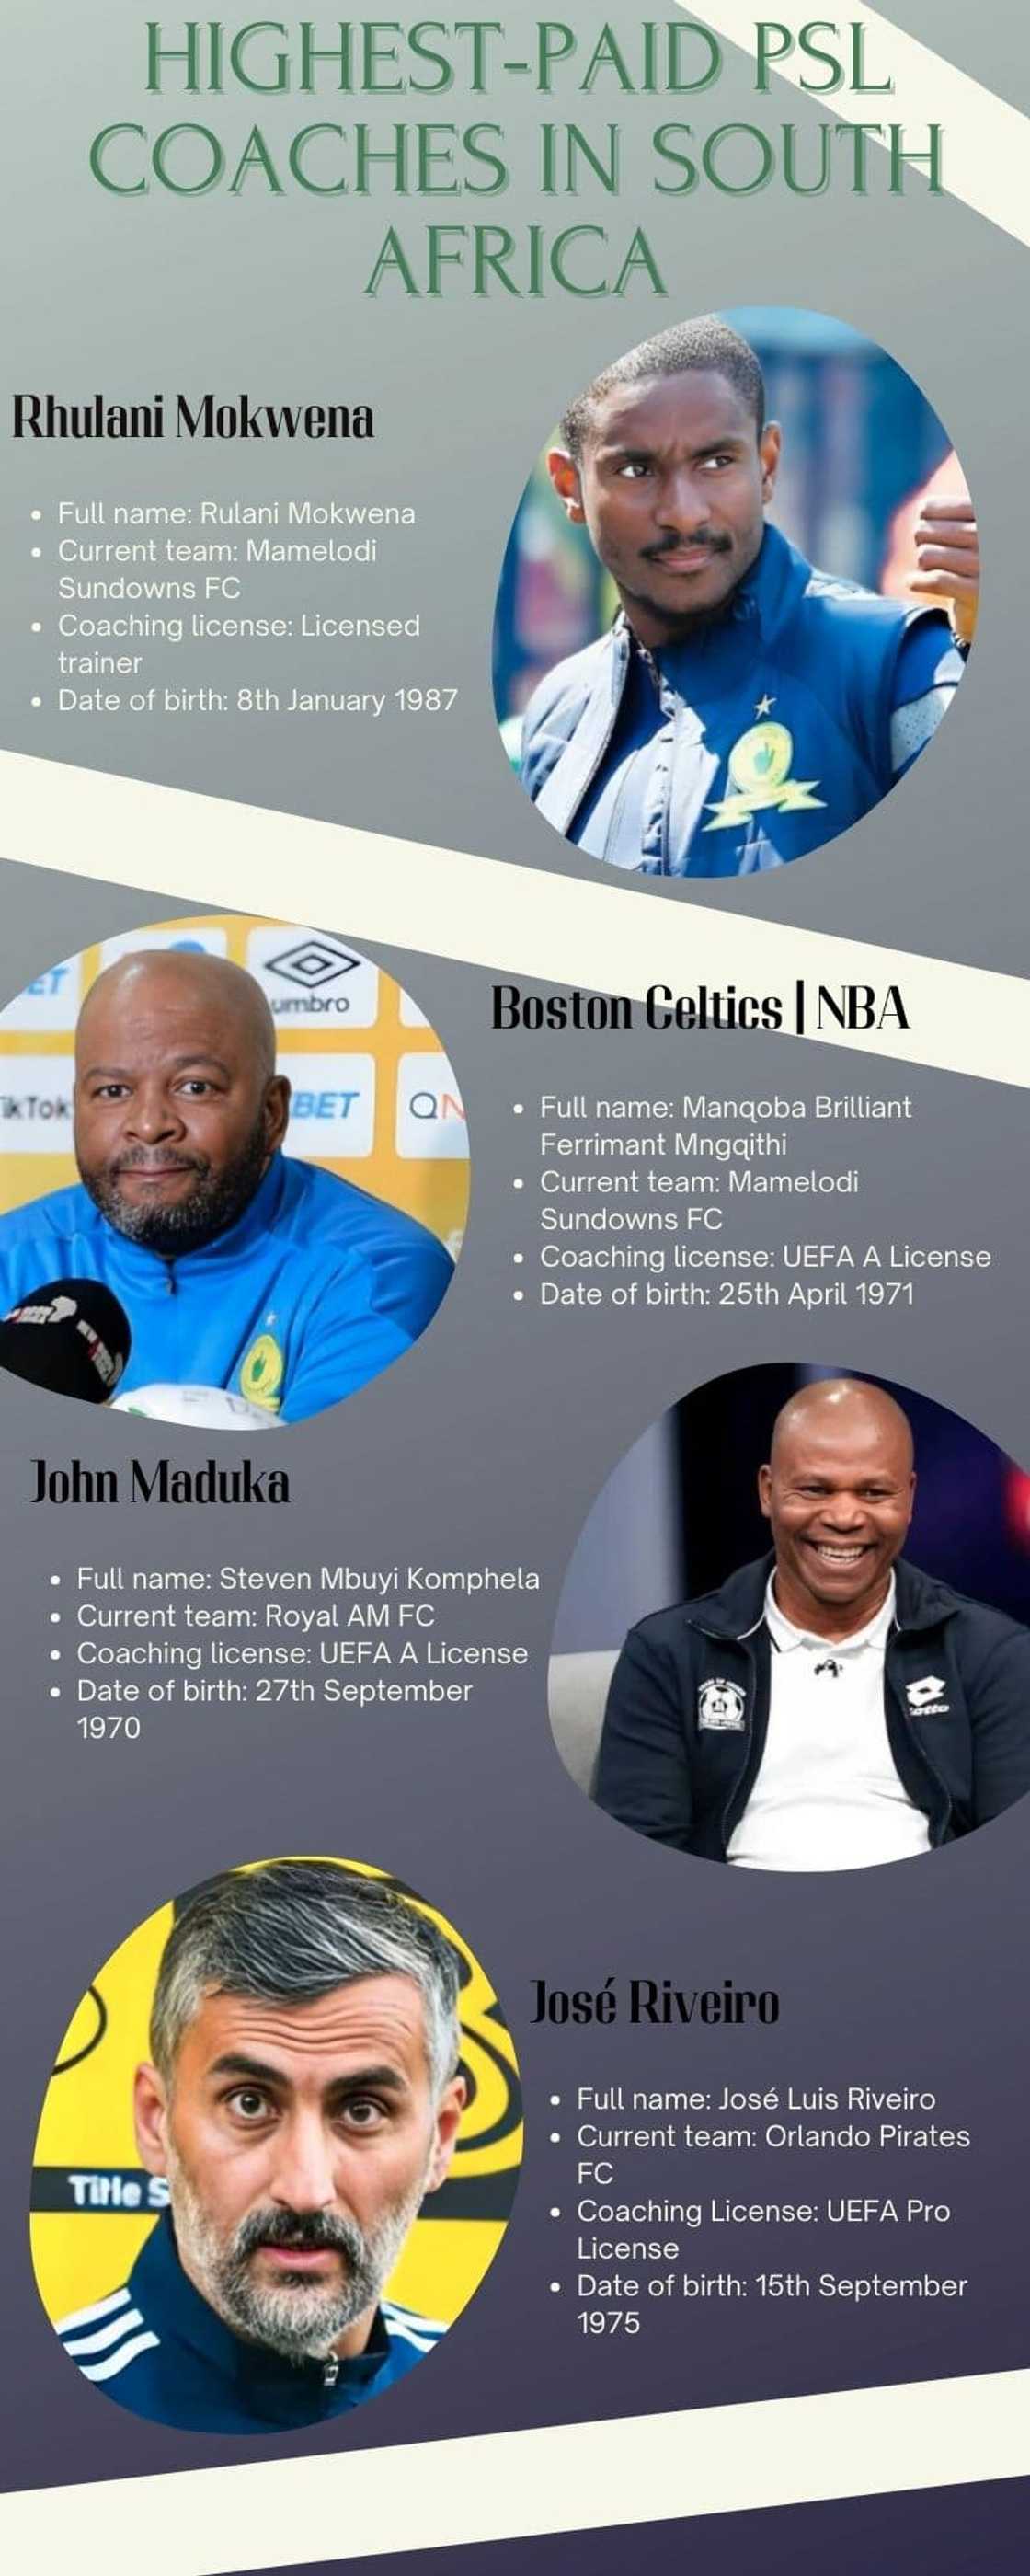 Highest-paid PSL coaches in South Africa